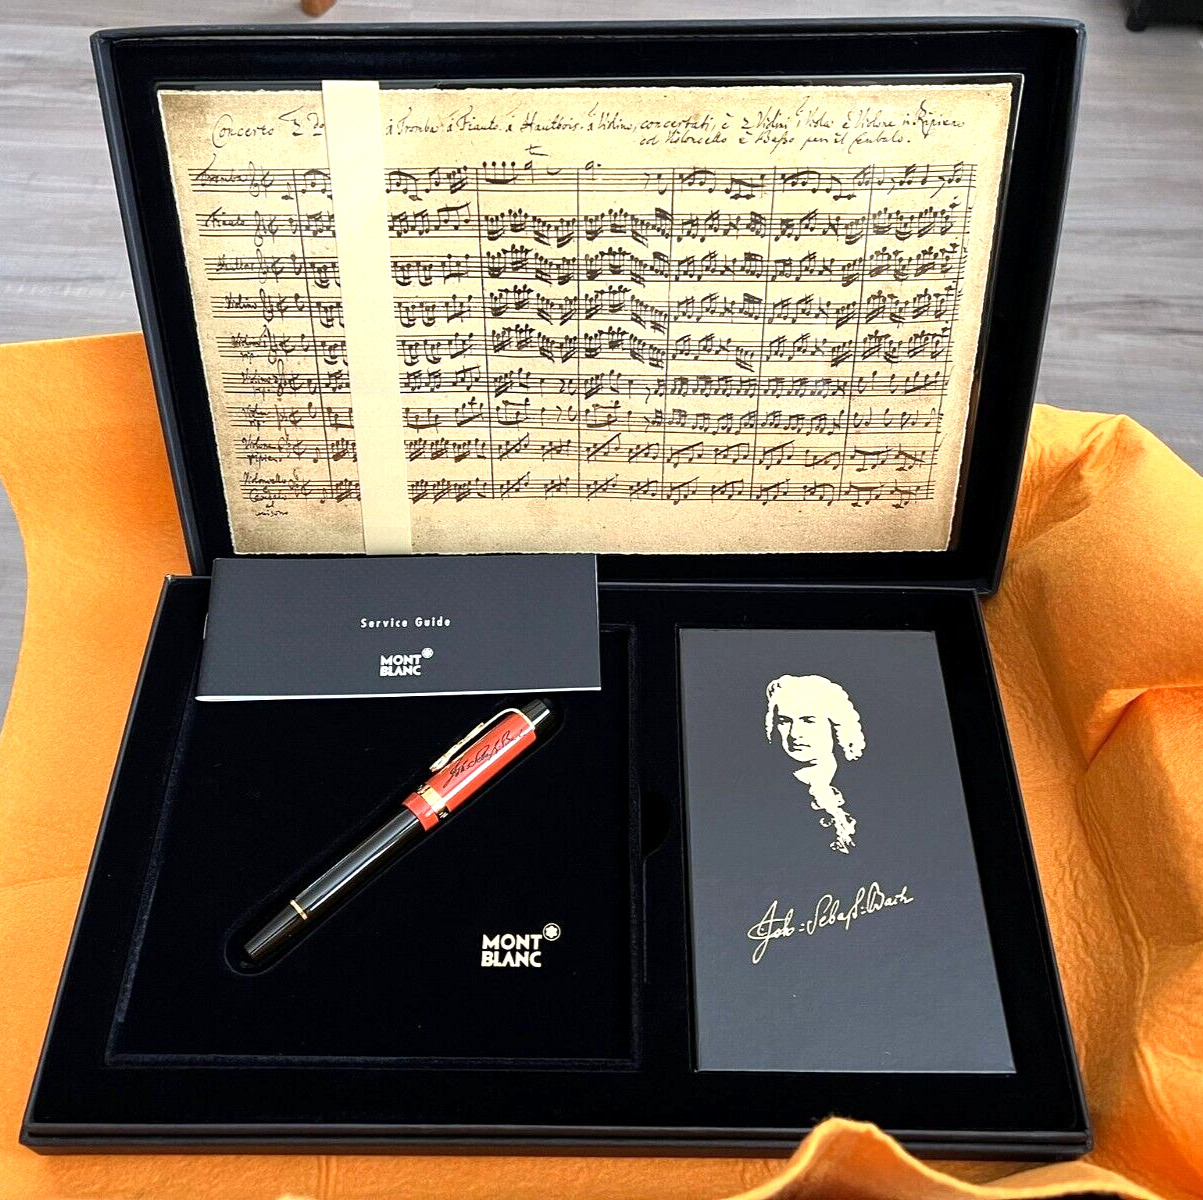 Montblanc J. Sebastian Bach Fountain Pen with Box, Music Notes, and Book (NEW)